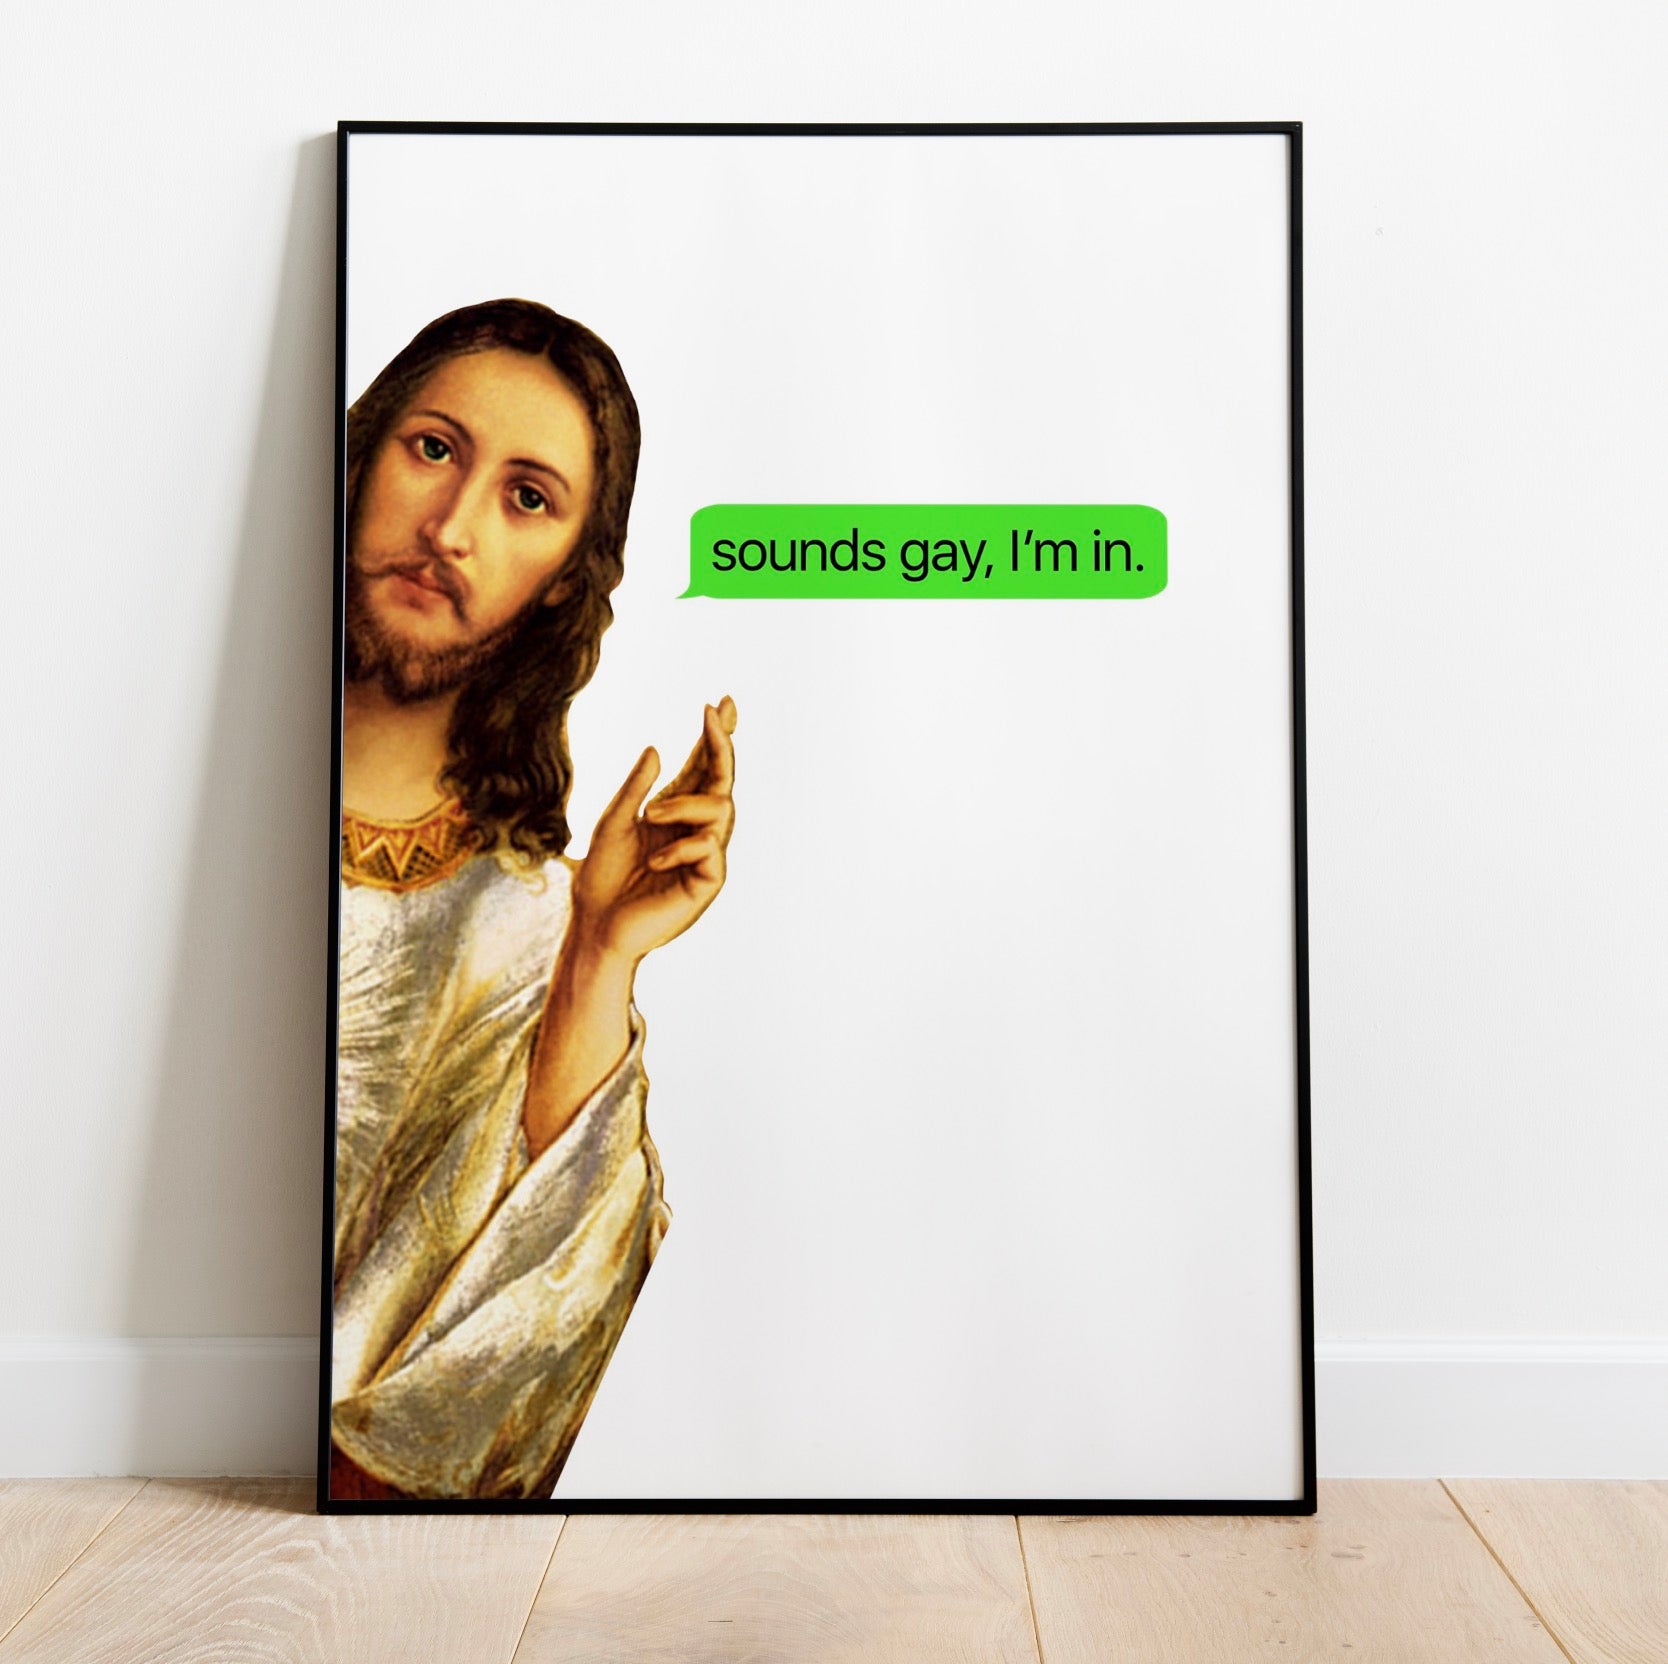 Jesus - Sounds gay, I'm in